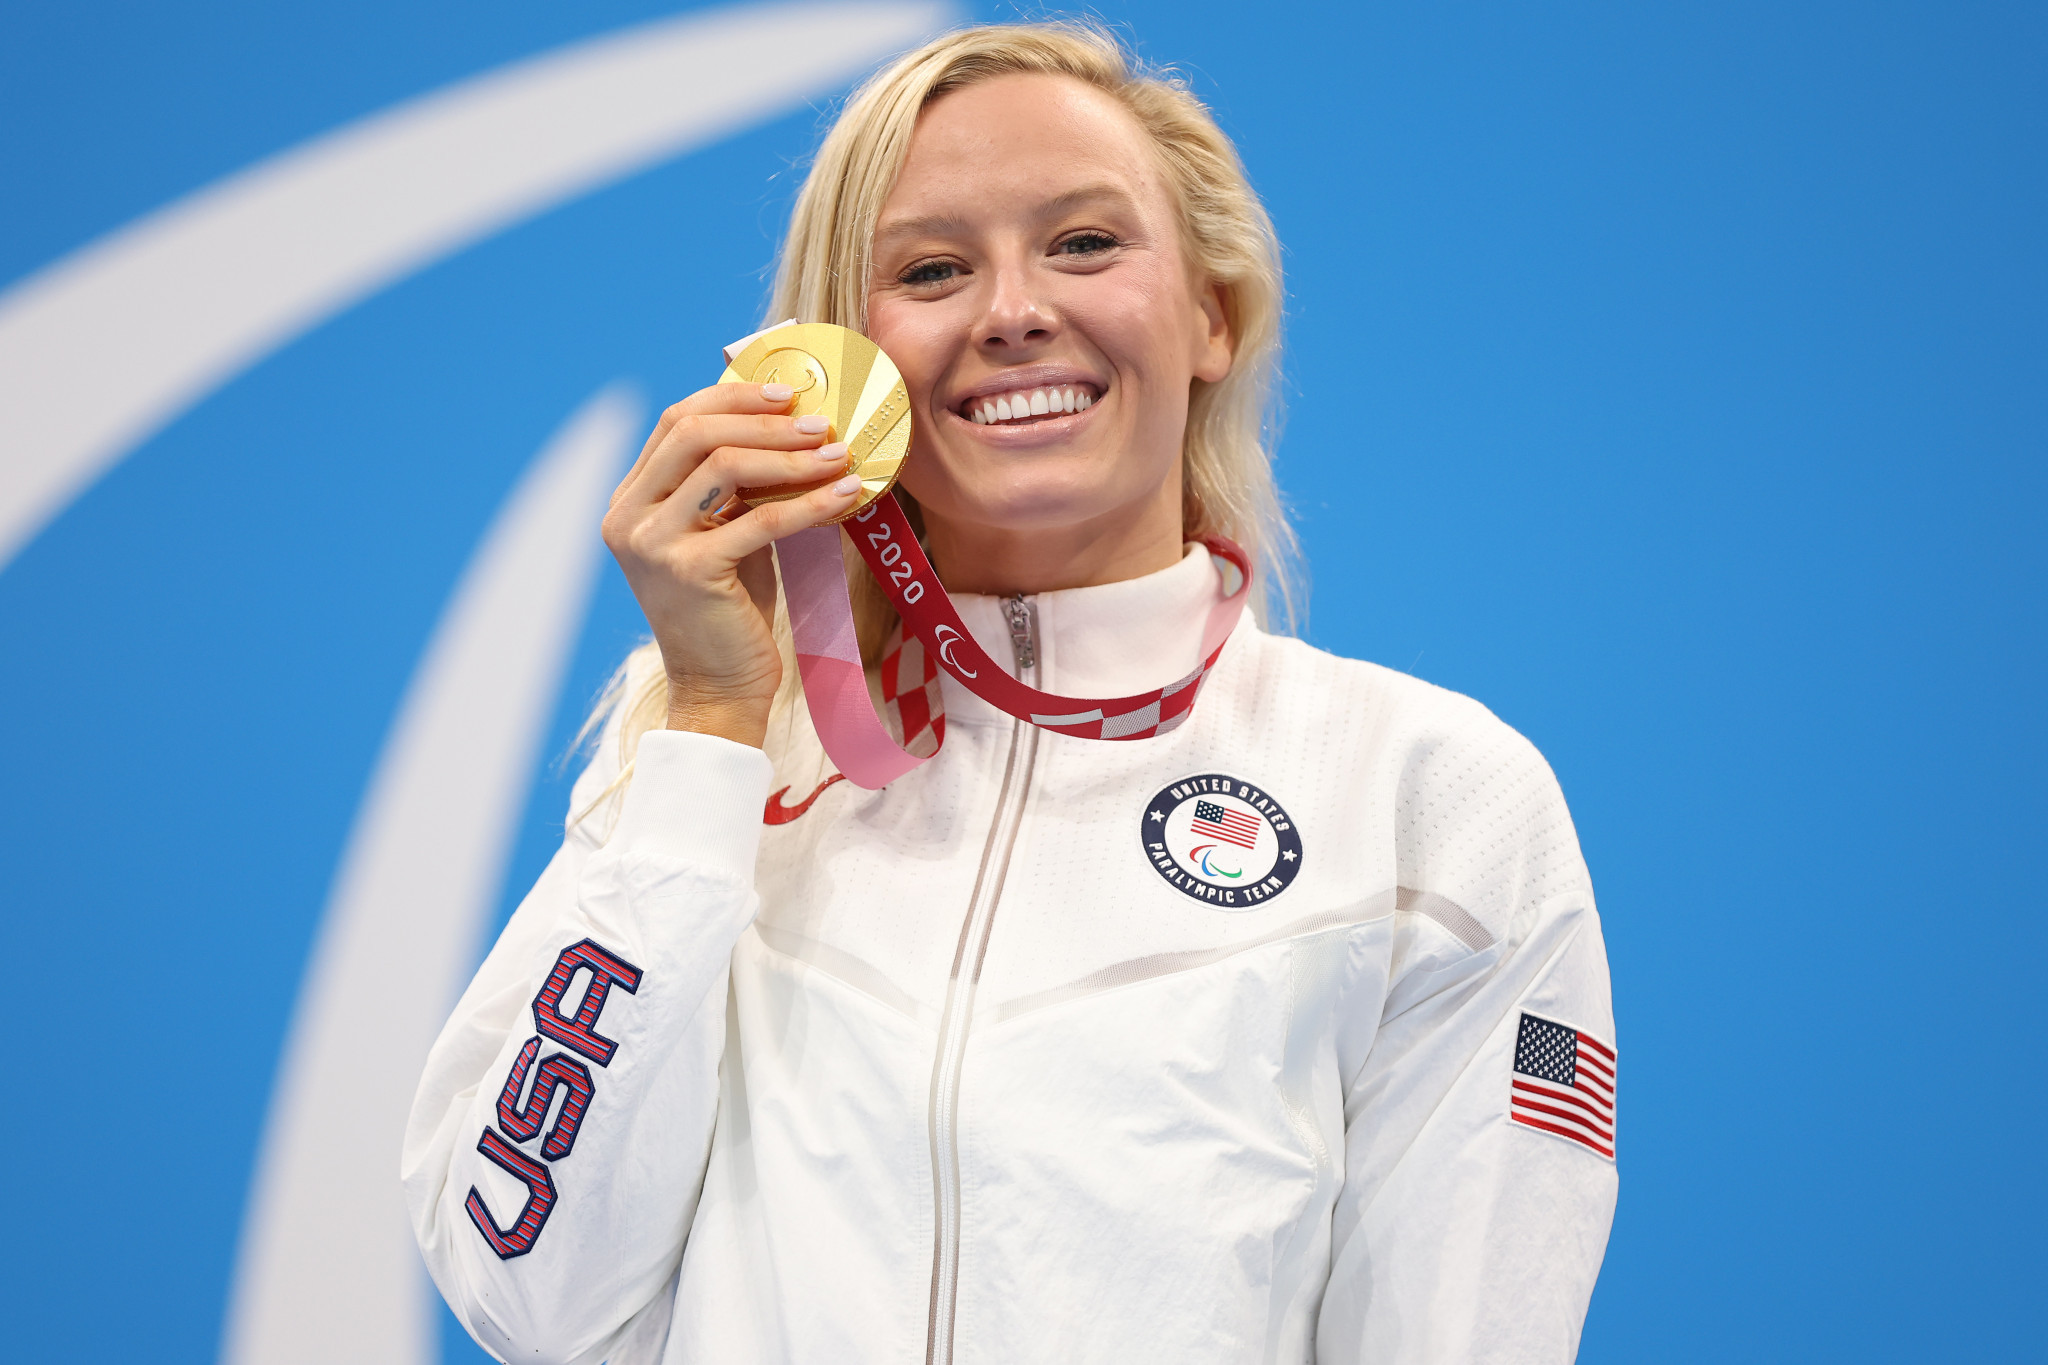 Swimmer Jessica Long has won 16 Paralympic gold medals representing the United States ©Getty Images